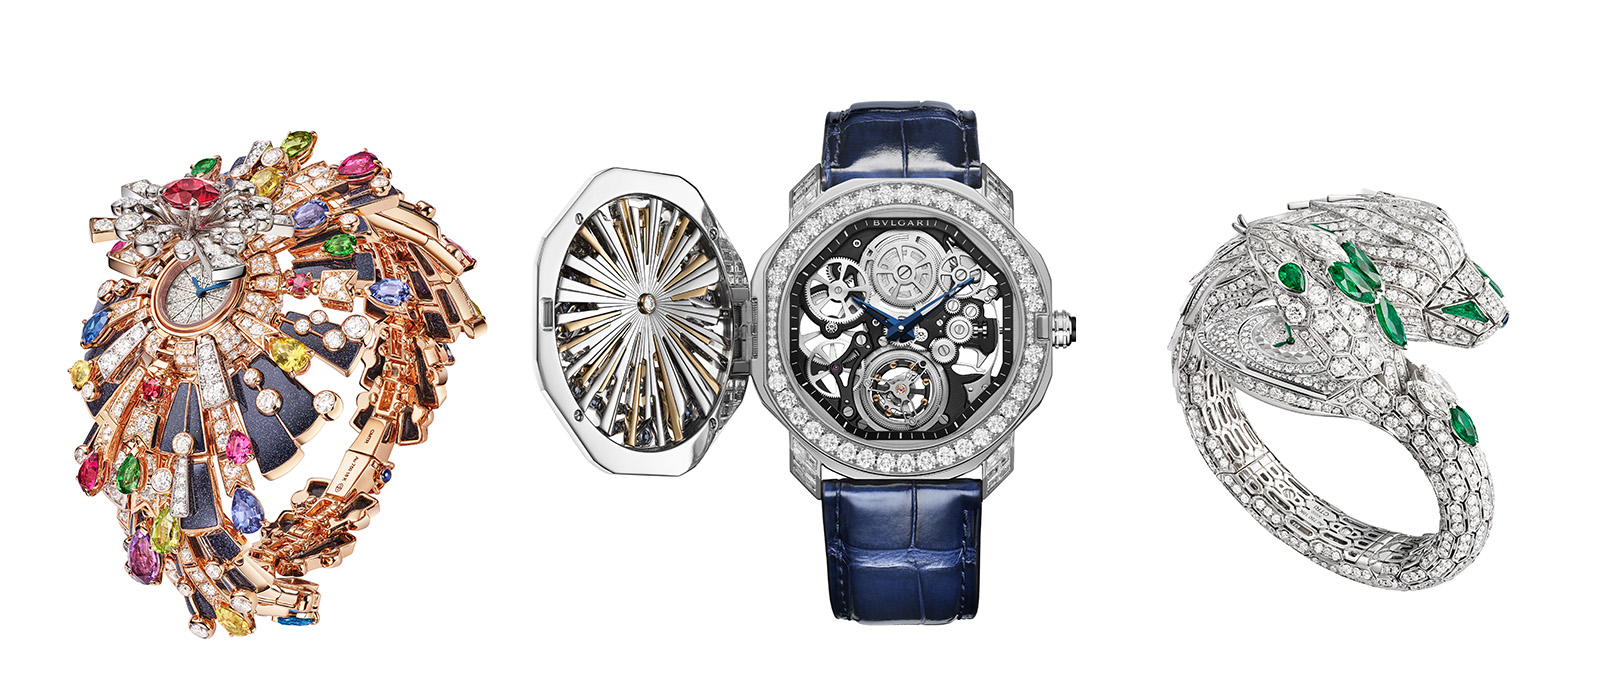 These Are The Insane Bulgari High Jewelry Watches In Aeterna